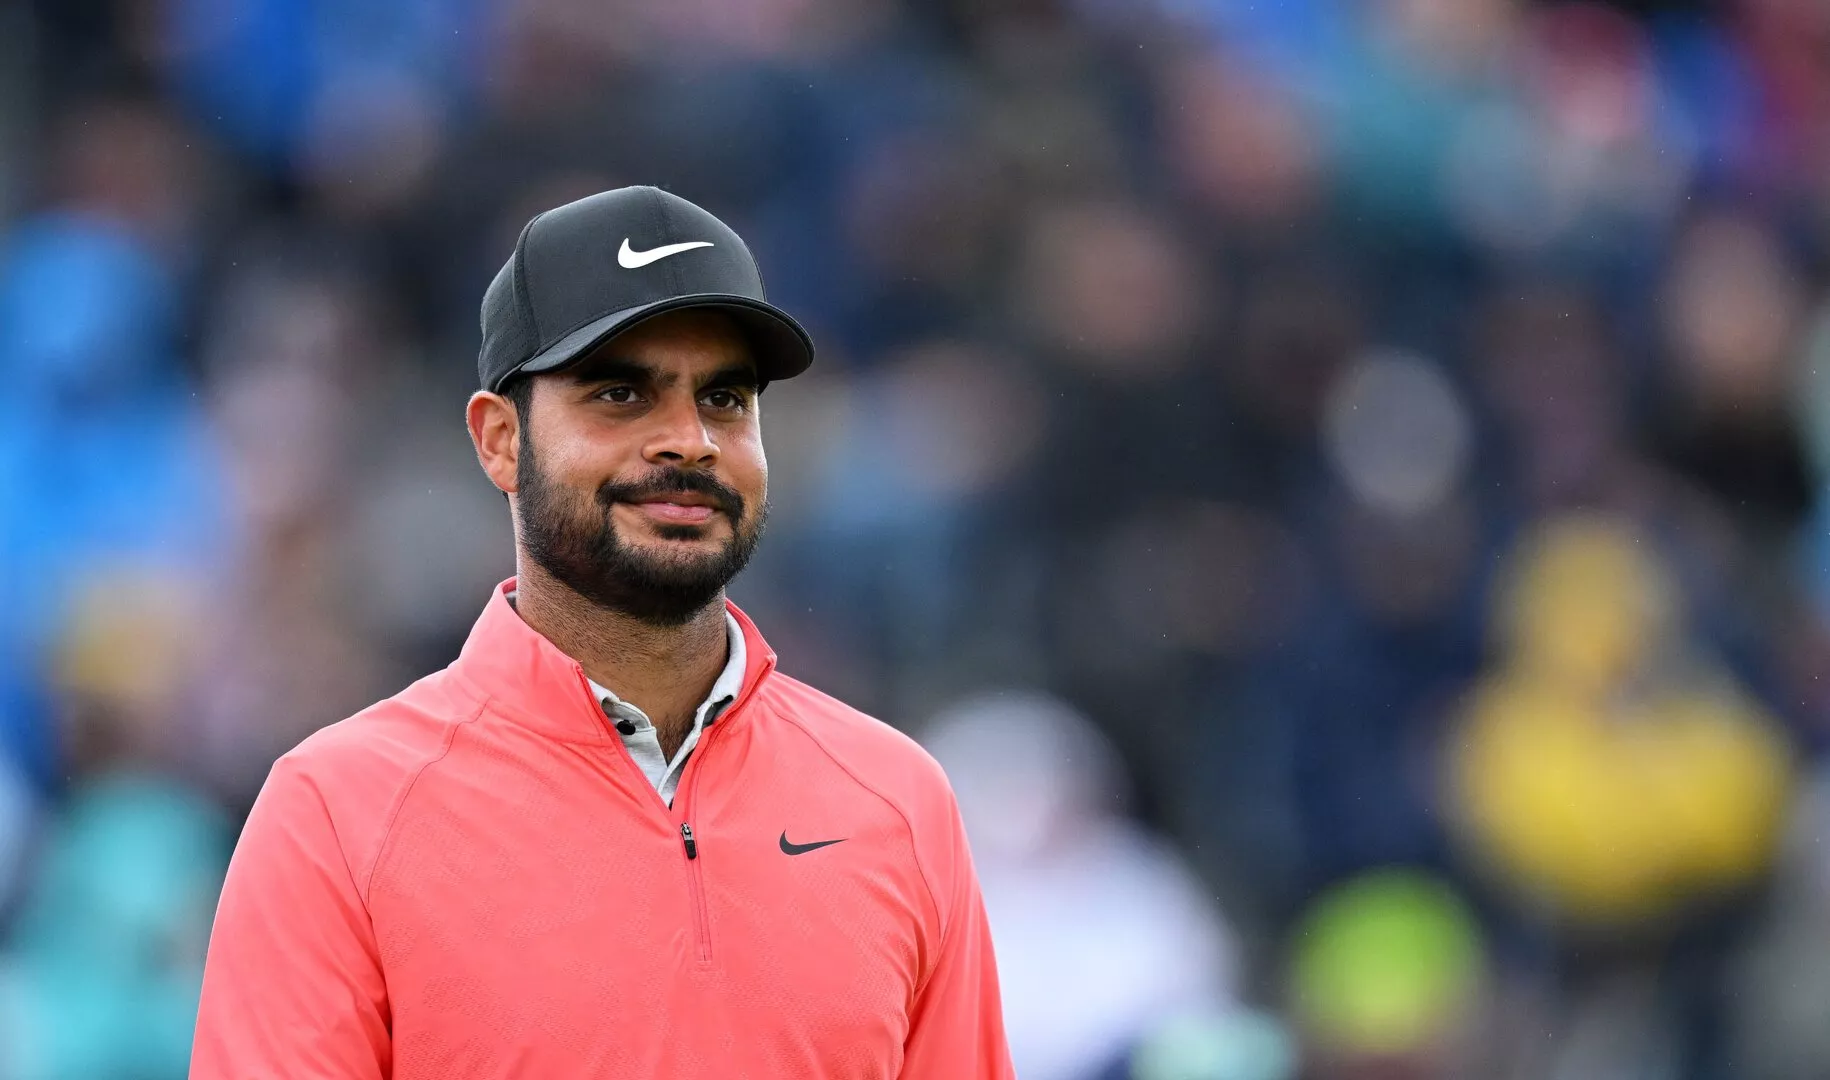 The Open Championship Day 3: Shubhankar Sharma Impresses, Currently Tied for 9th